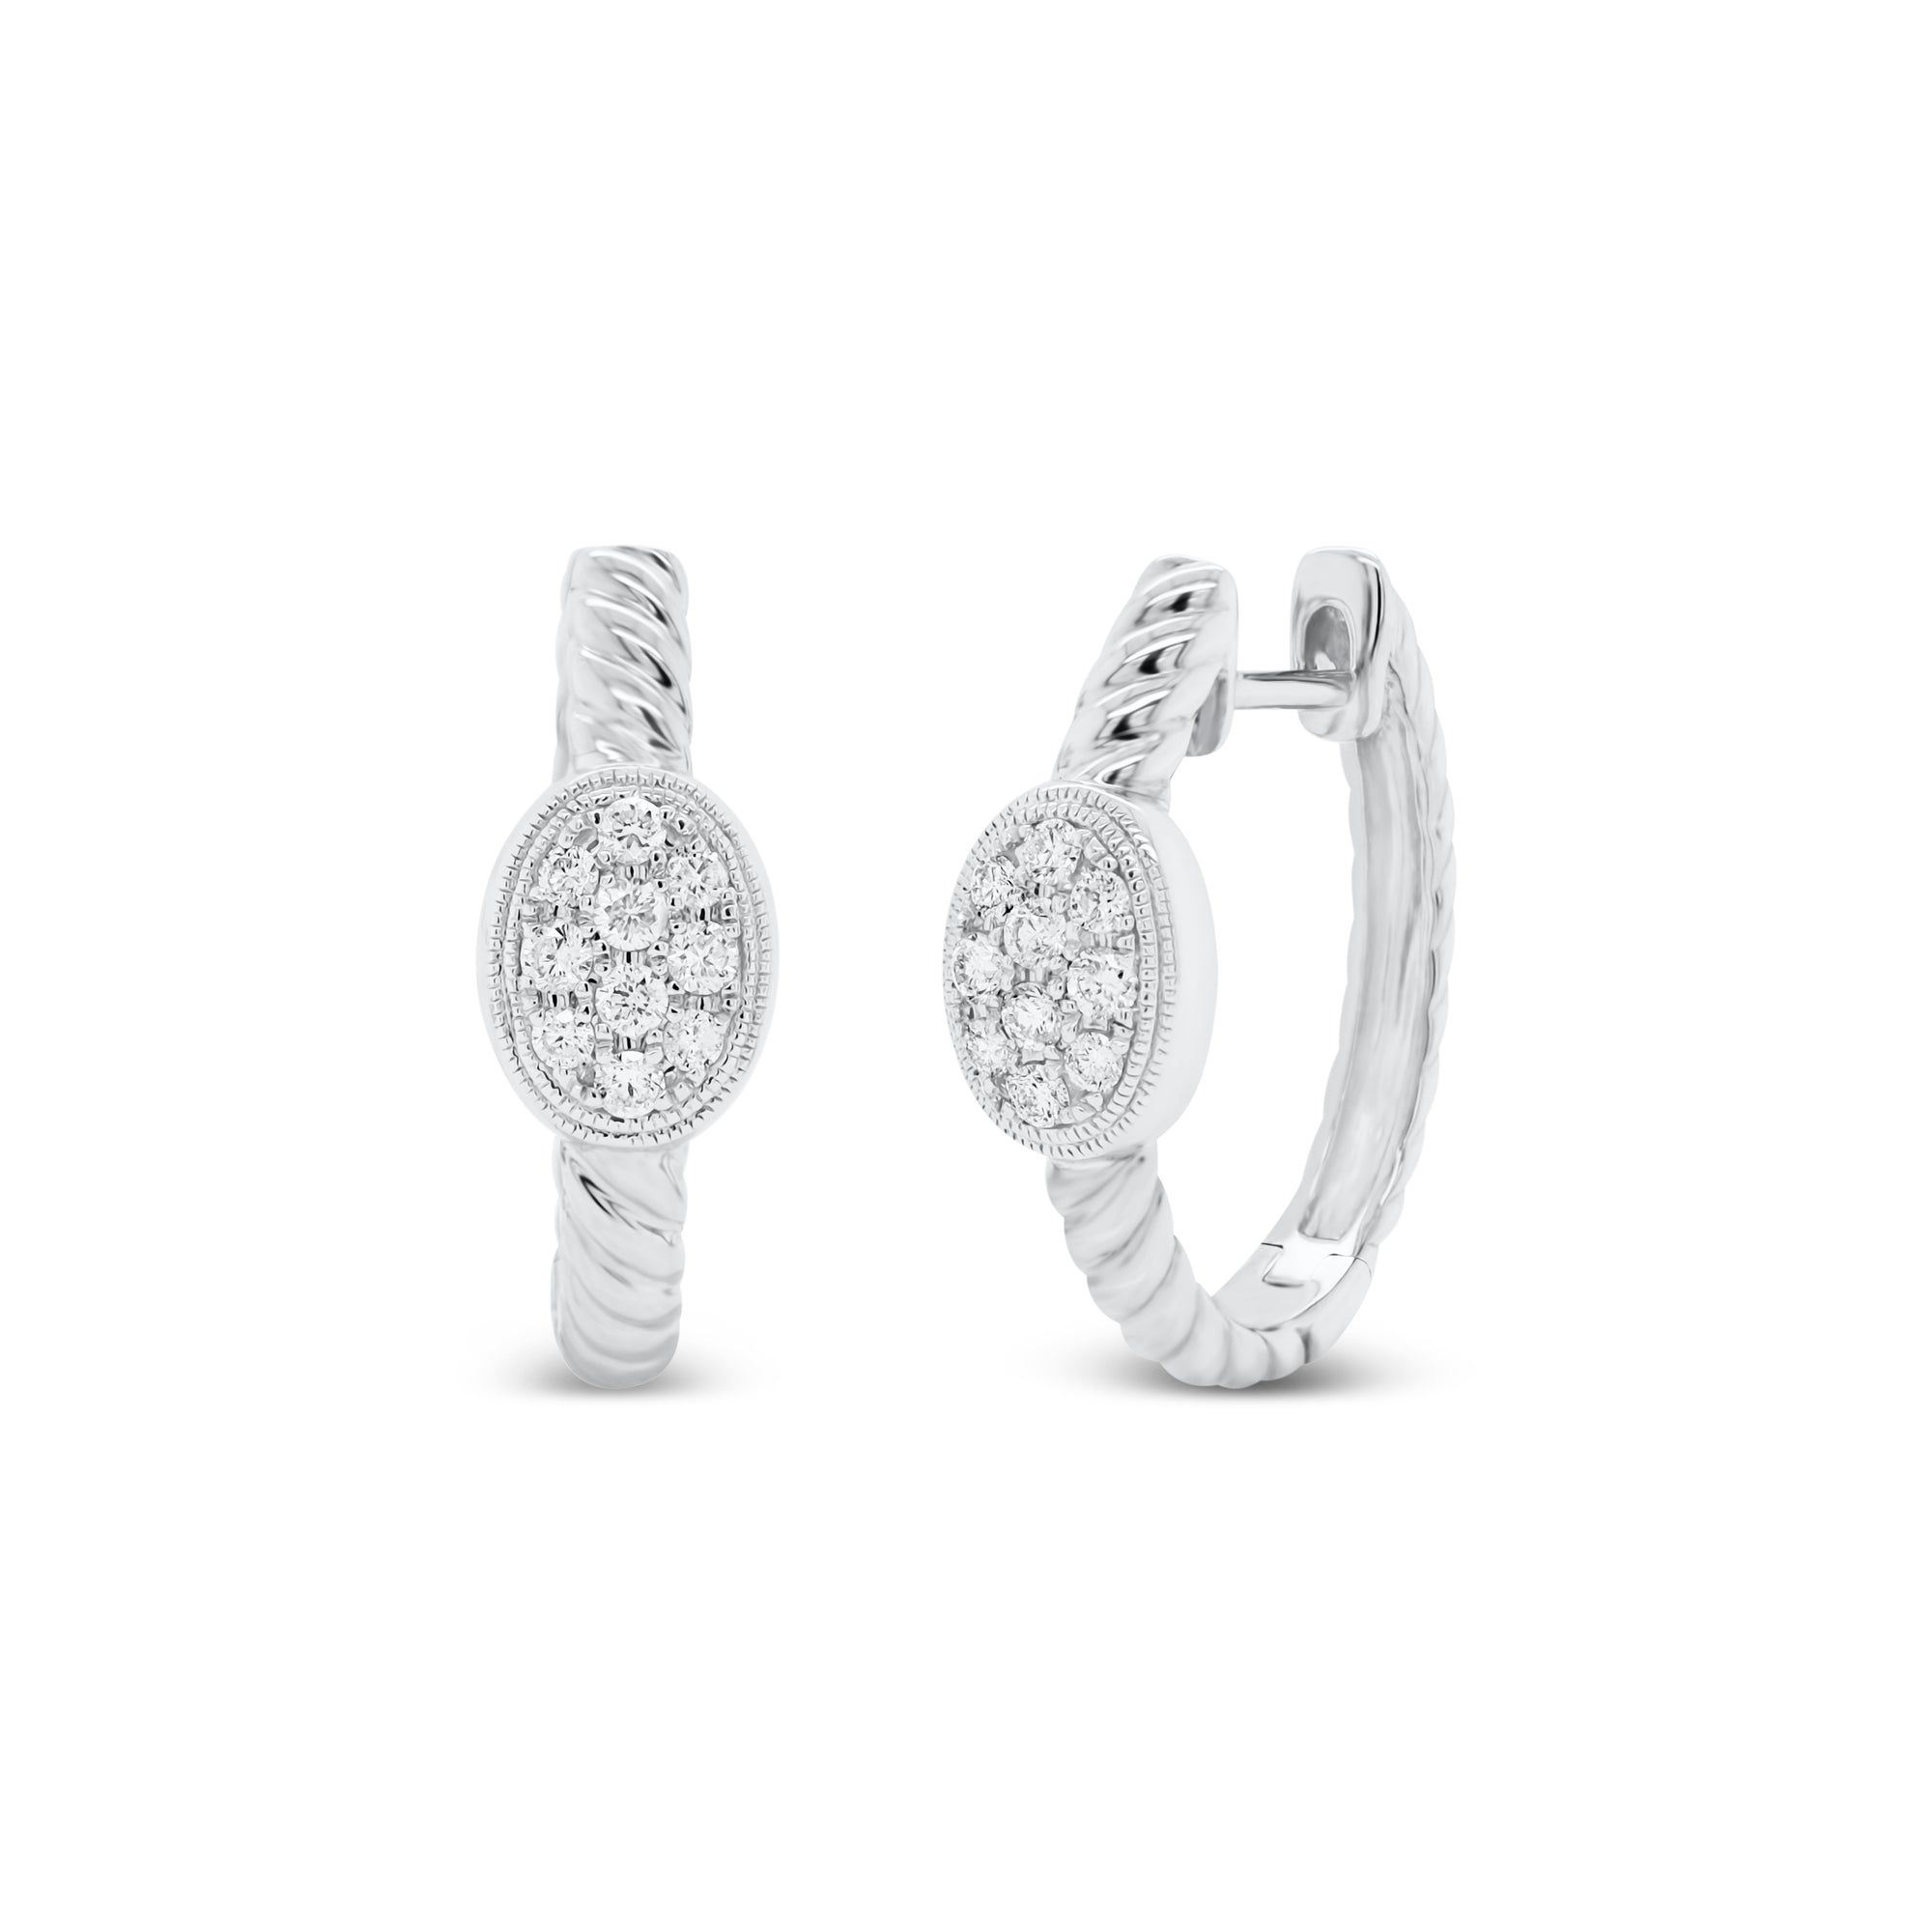 Gold Twist Hoop Earrings with Diamond Ovals - 14K gold weighing 4.29 grams  - 20 round diamonds totaling 0.32 carats